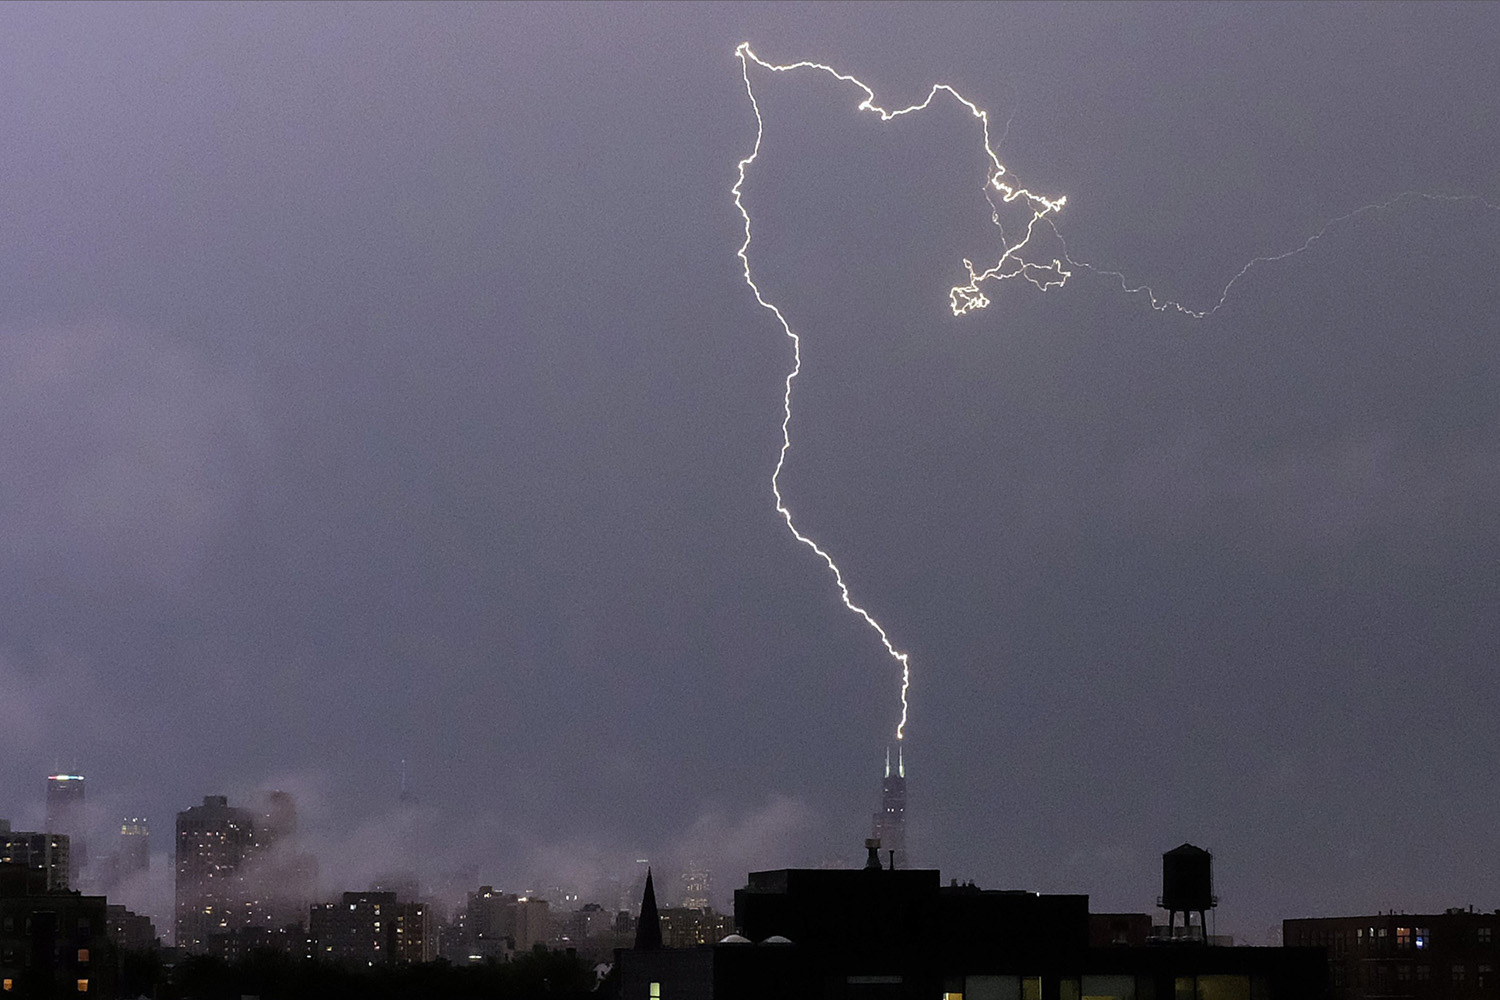 Jun. 30, 2014. A bolt of lightening strikes near the top of the Willis tower in downtown Chicago, as rain and high winds were moving into Illinois from Iowa.